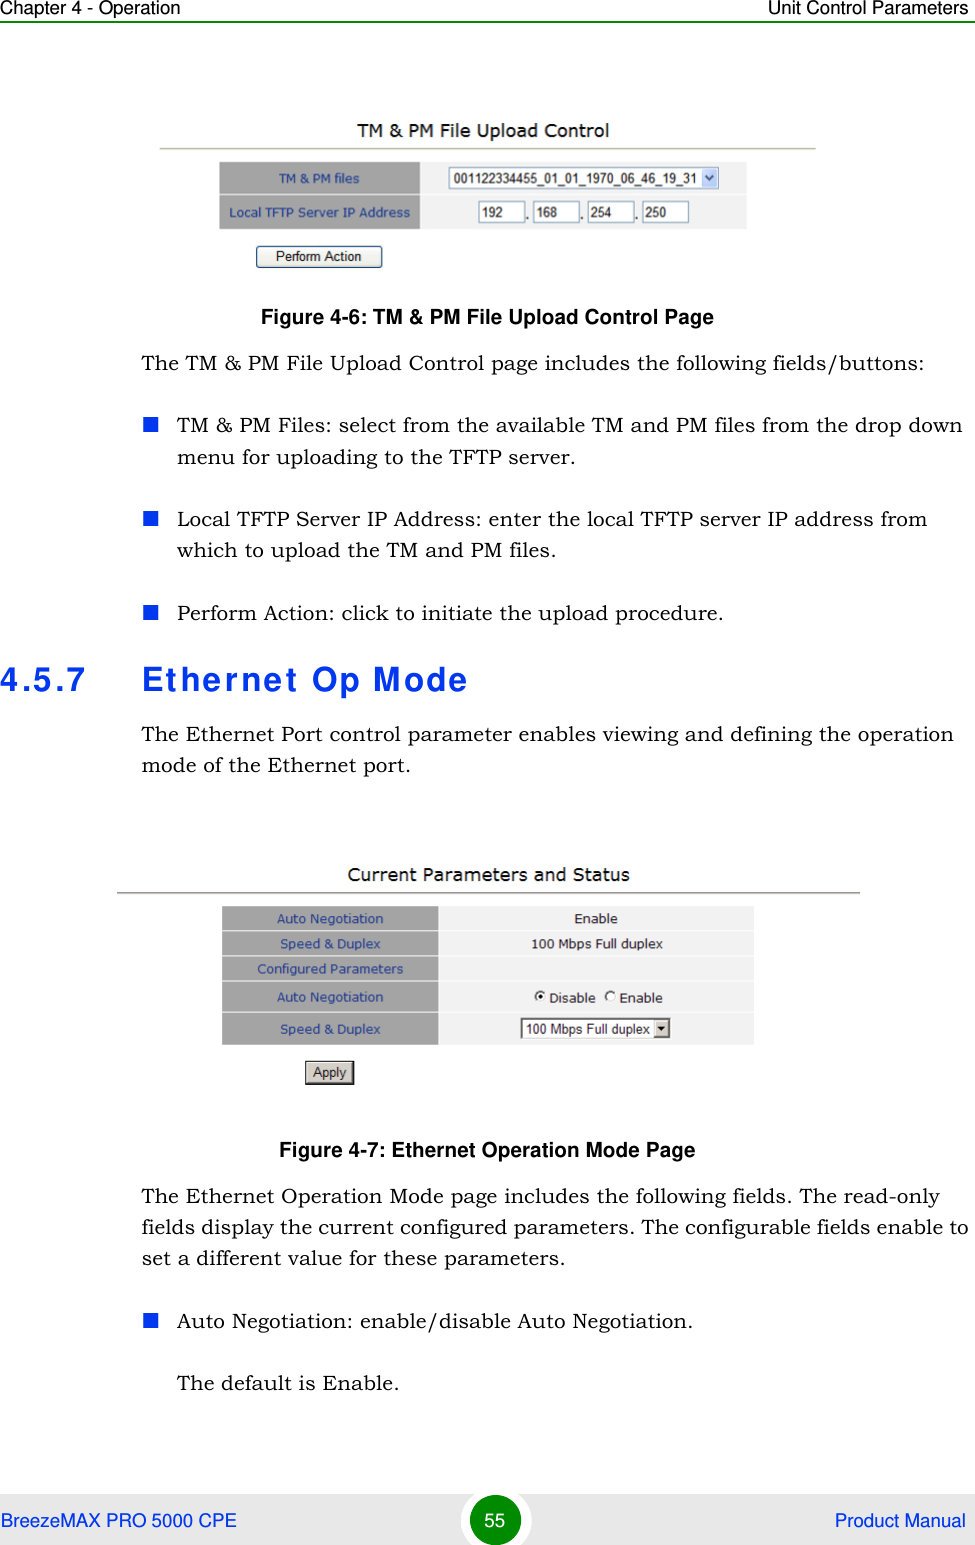 Chapter 4 - Operation Unit Control ParametersBreezeMAX PRO 5000 CPE 55  Product ManualThe TM &amp; PM File Upload Control page includes the following fields/buttons:TM &amp; PM Files: select from the available TM and PM files from the drop down menu for uploading to the TFTP server.Local TFTP Server IP Address: enter the local TFTP server IP address from which to upload the TM and PM files.Perform Action: click to initiate the upload procedure.4.5.7 Ethernet Op ModeThe Ethernet Port control parameter enables viewing and defining the operation mode of the Ethernet port.The Ethernet Operation Mode page includes the following fields. The read-only fields display the current configured parameters. The configurable fields enable to set a different value for these parameters.Auto Negotiation: enable/disable Auto Negotiation.The default is Enable.Figure 4-6: TM &amp; PM File Upload Control PageFigure 4-7: Ethernet Operation Mode Page